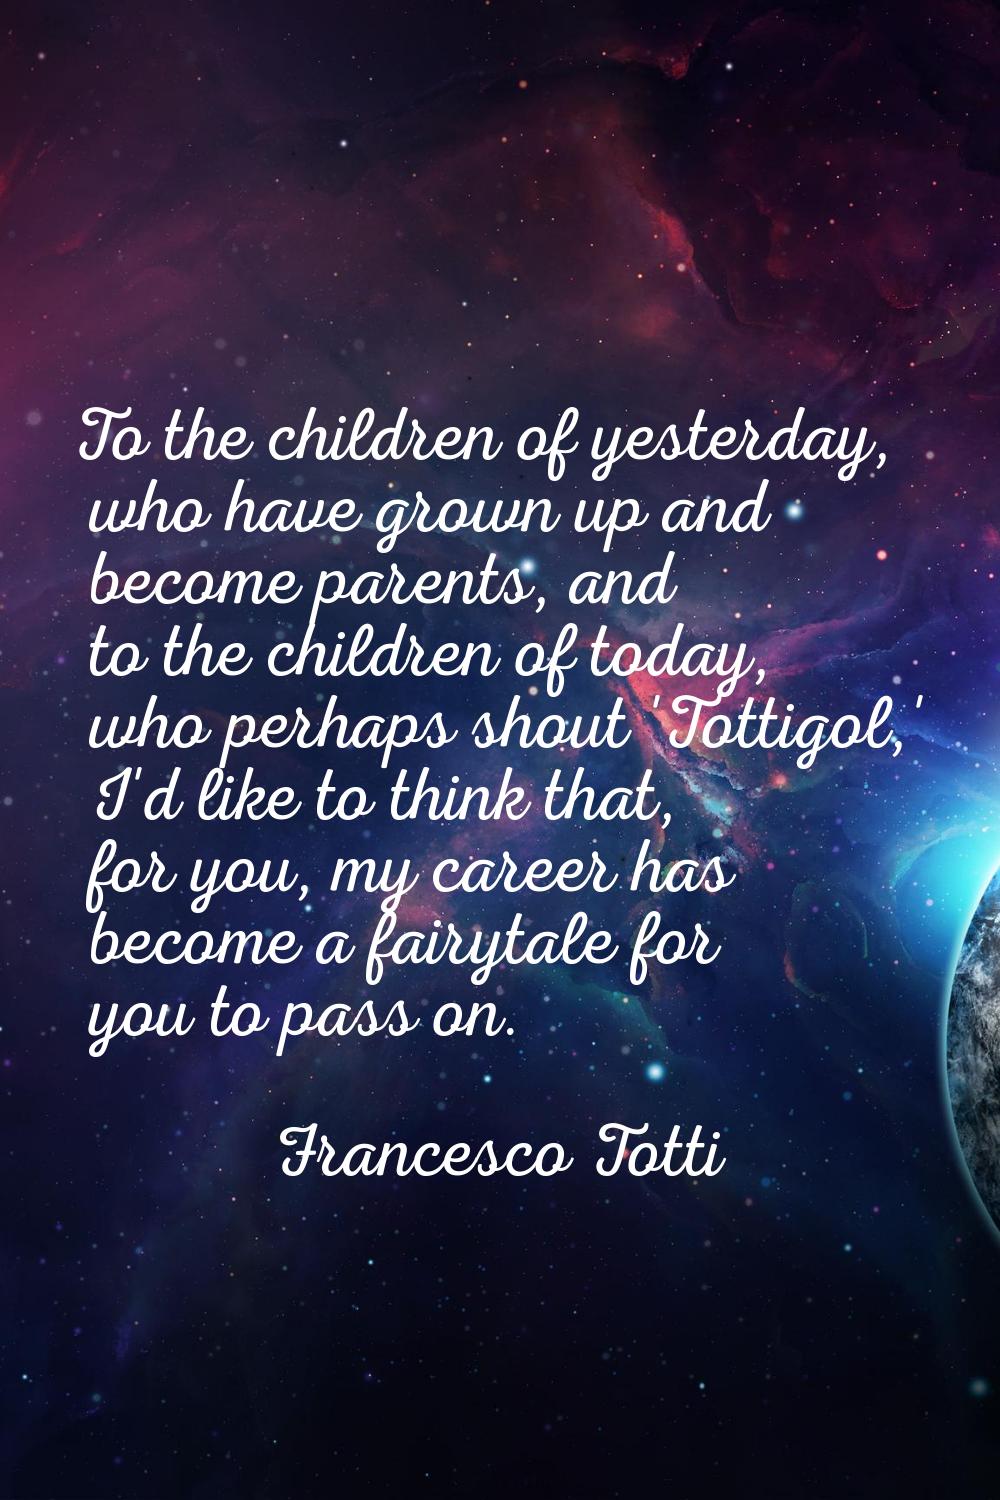 To the children of yesterday, who have grown up and become parents, and to the children of today, w